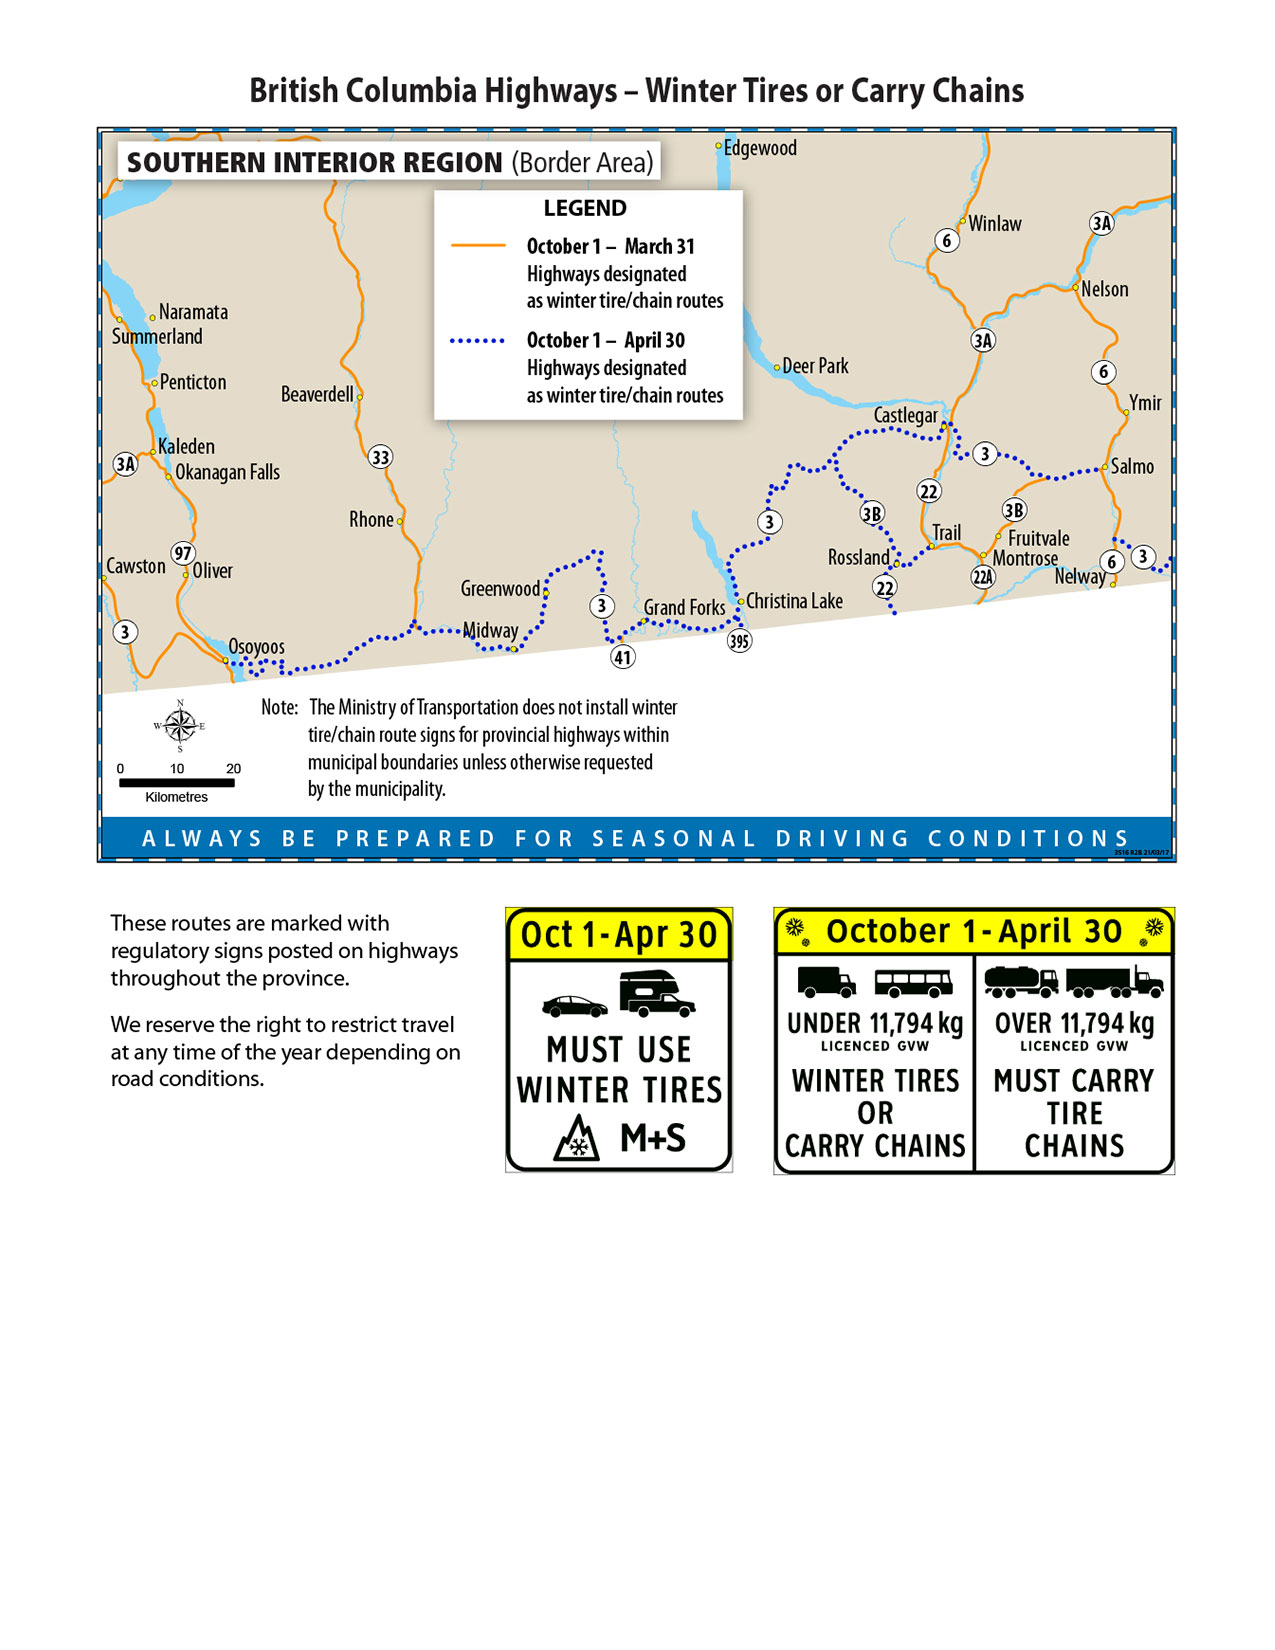 Southern Interior Region Border Inset map of winter tire and chains requirements